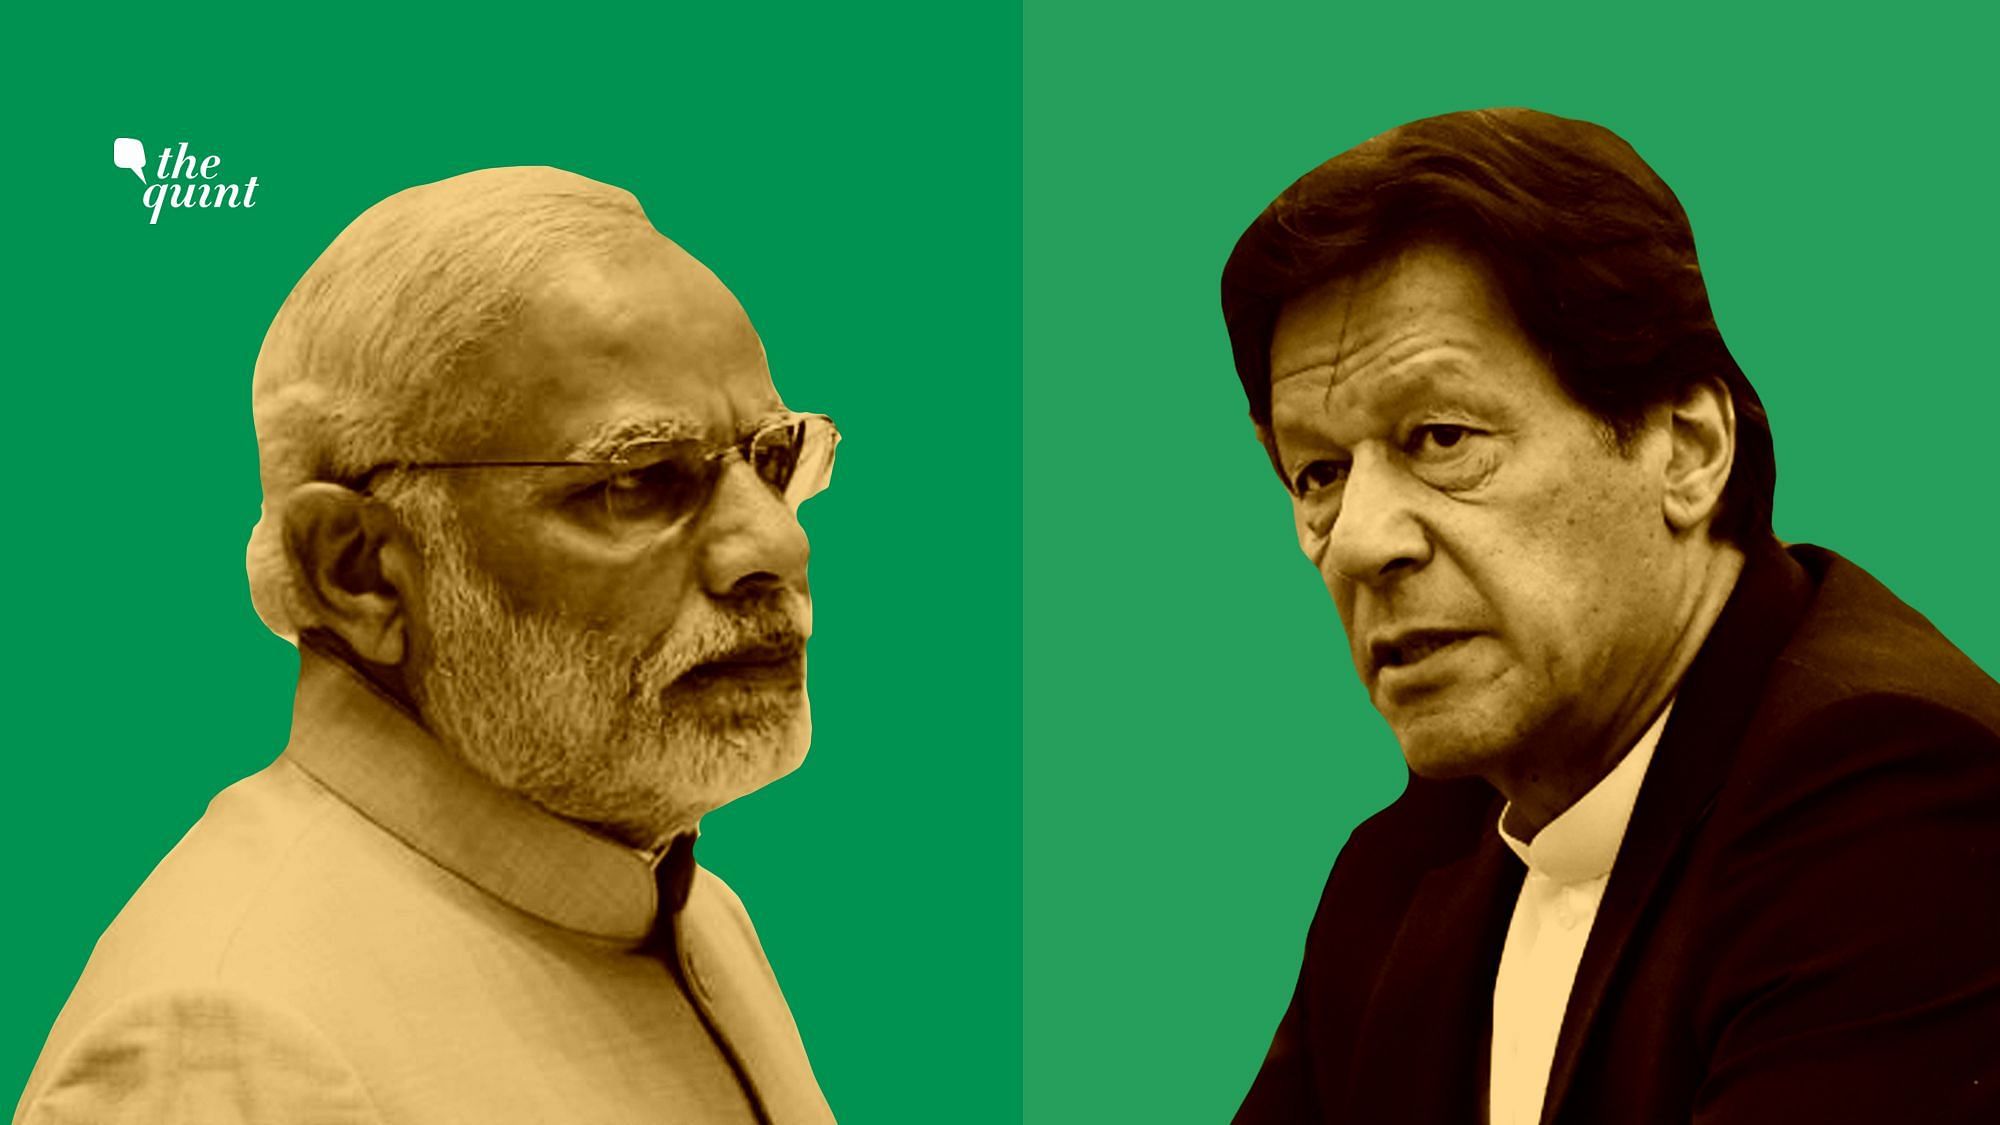 The report suggested that under Prime Minister Narendra Modi’s leadership, India is likely to respond with military force to perceived or real Pakistani provocations.